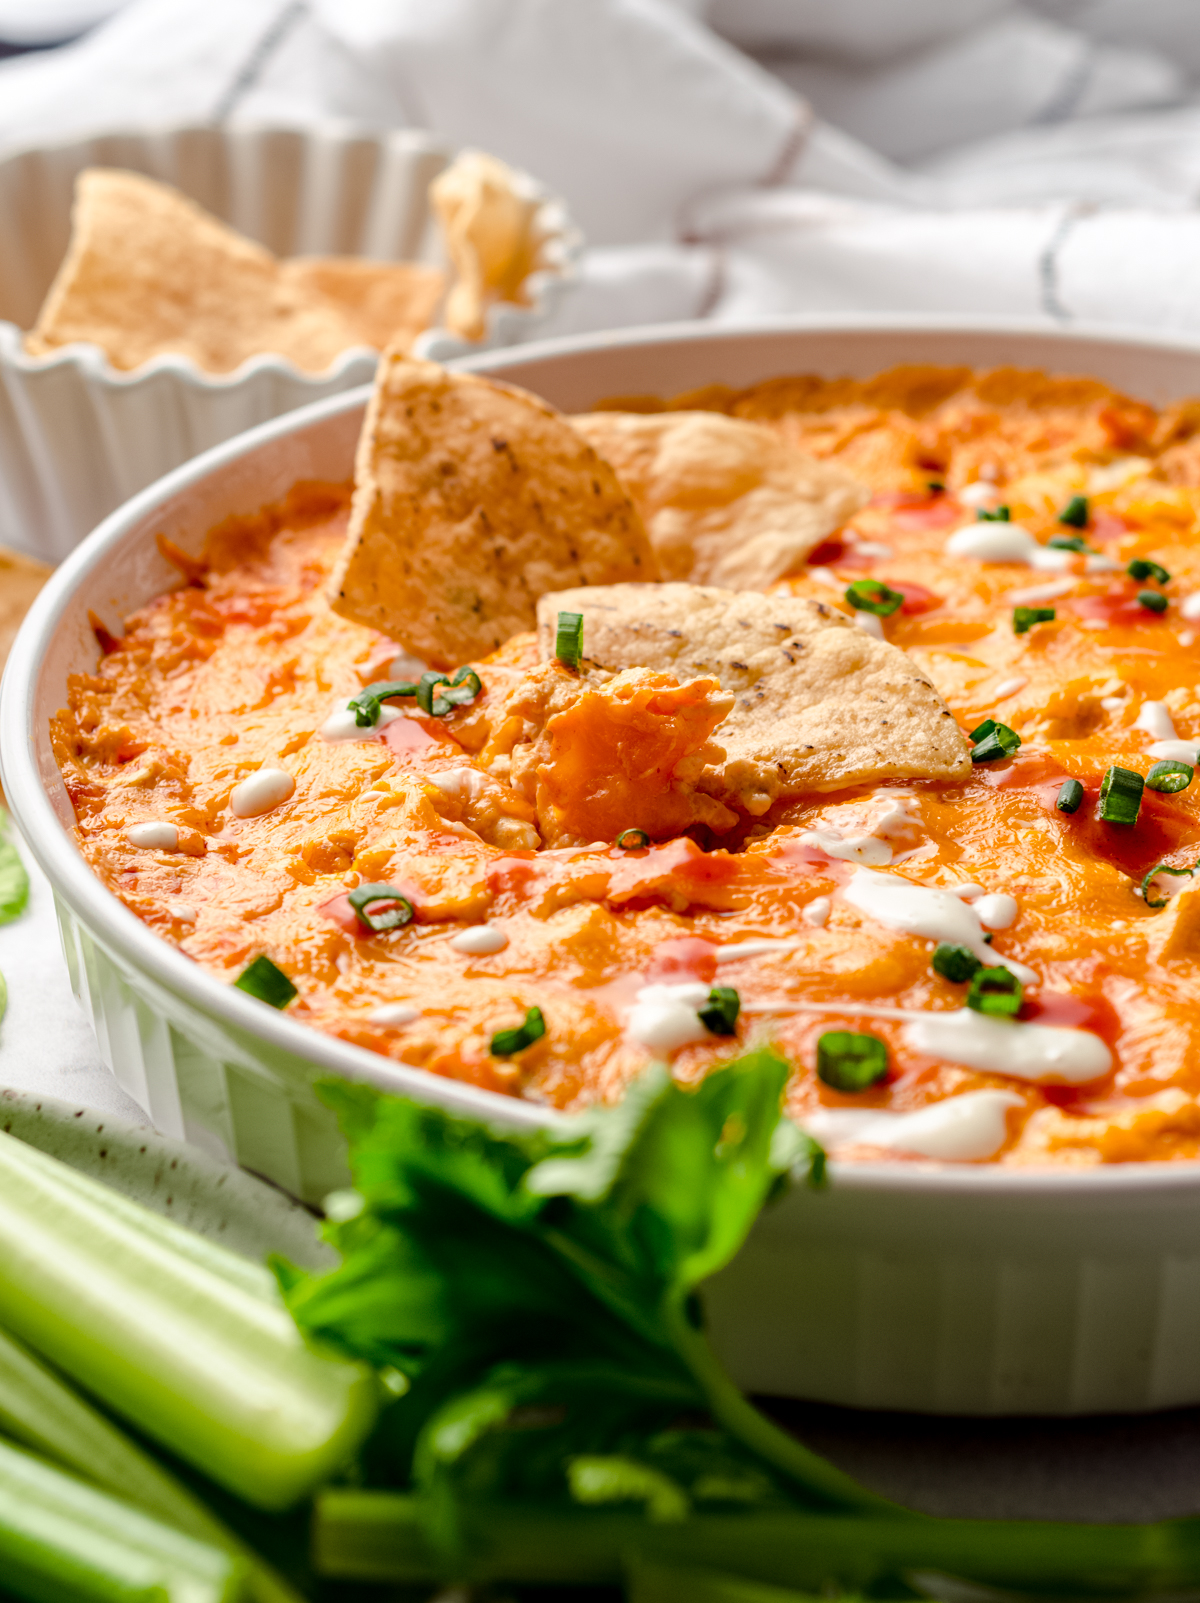 A dish of buffalo chicken dip with chips in it.